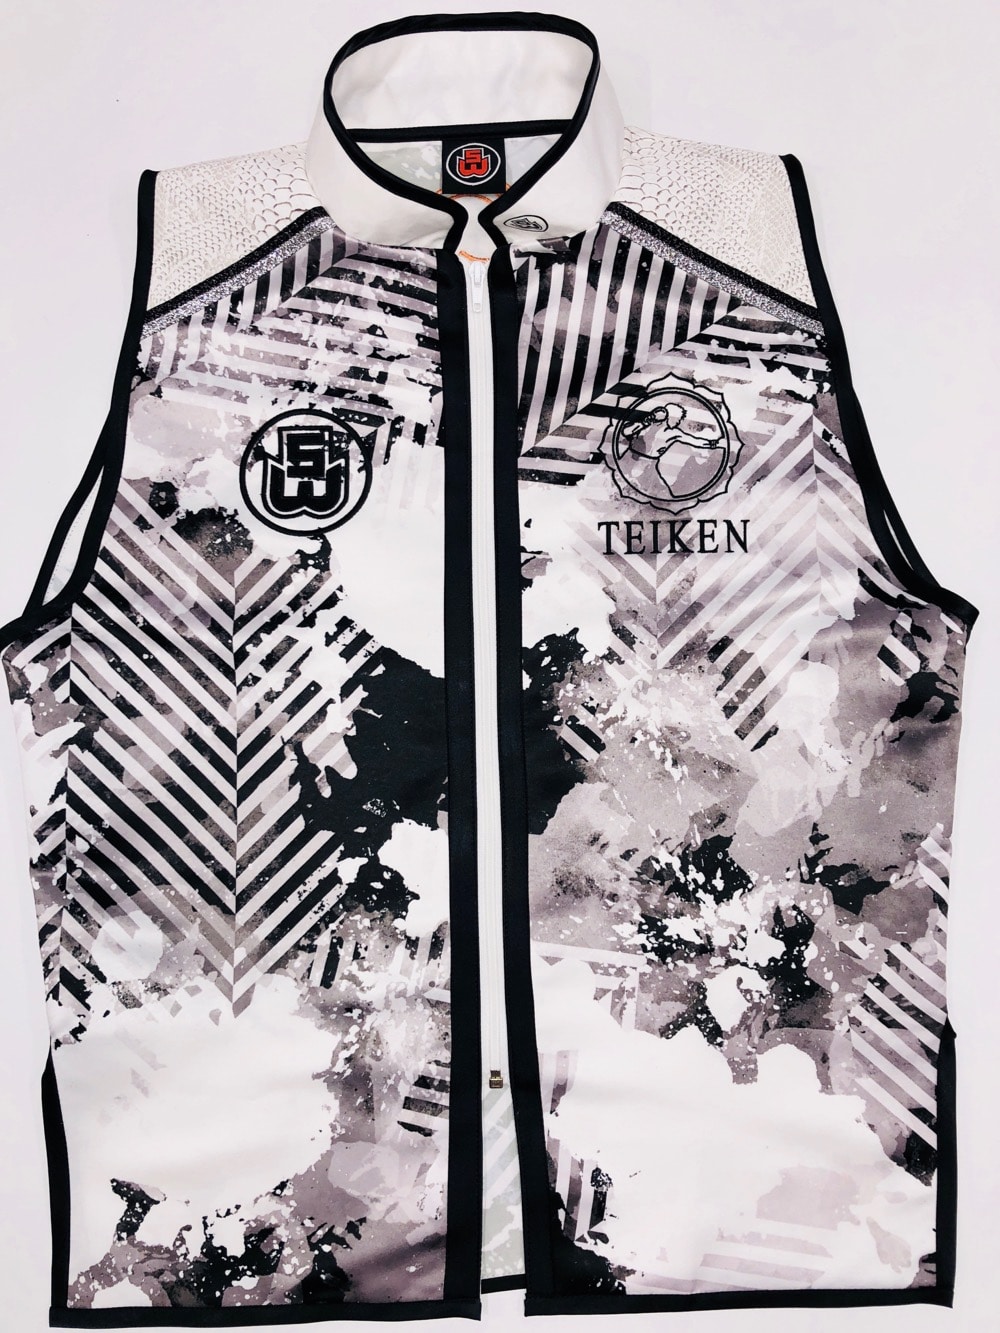 linares vs cotto ring jacket black and white